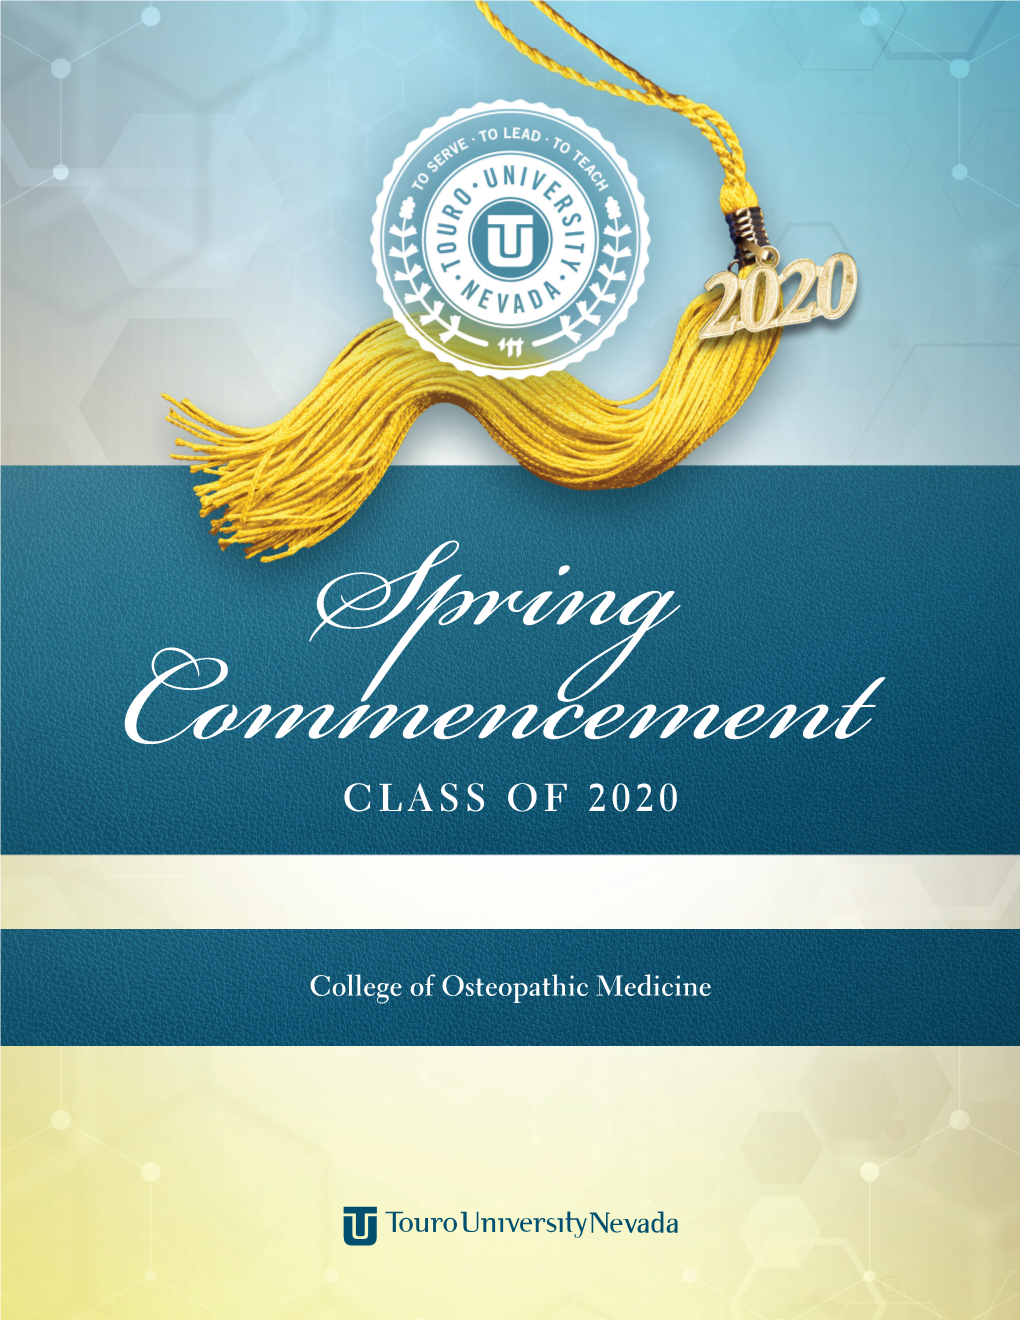 CLASS of 2020 Commencement